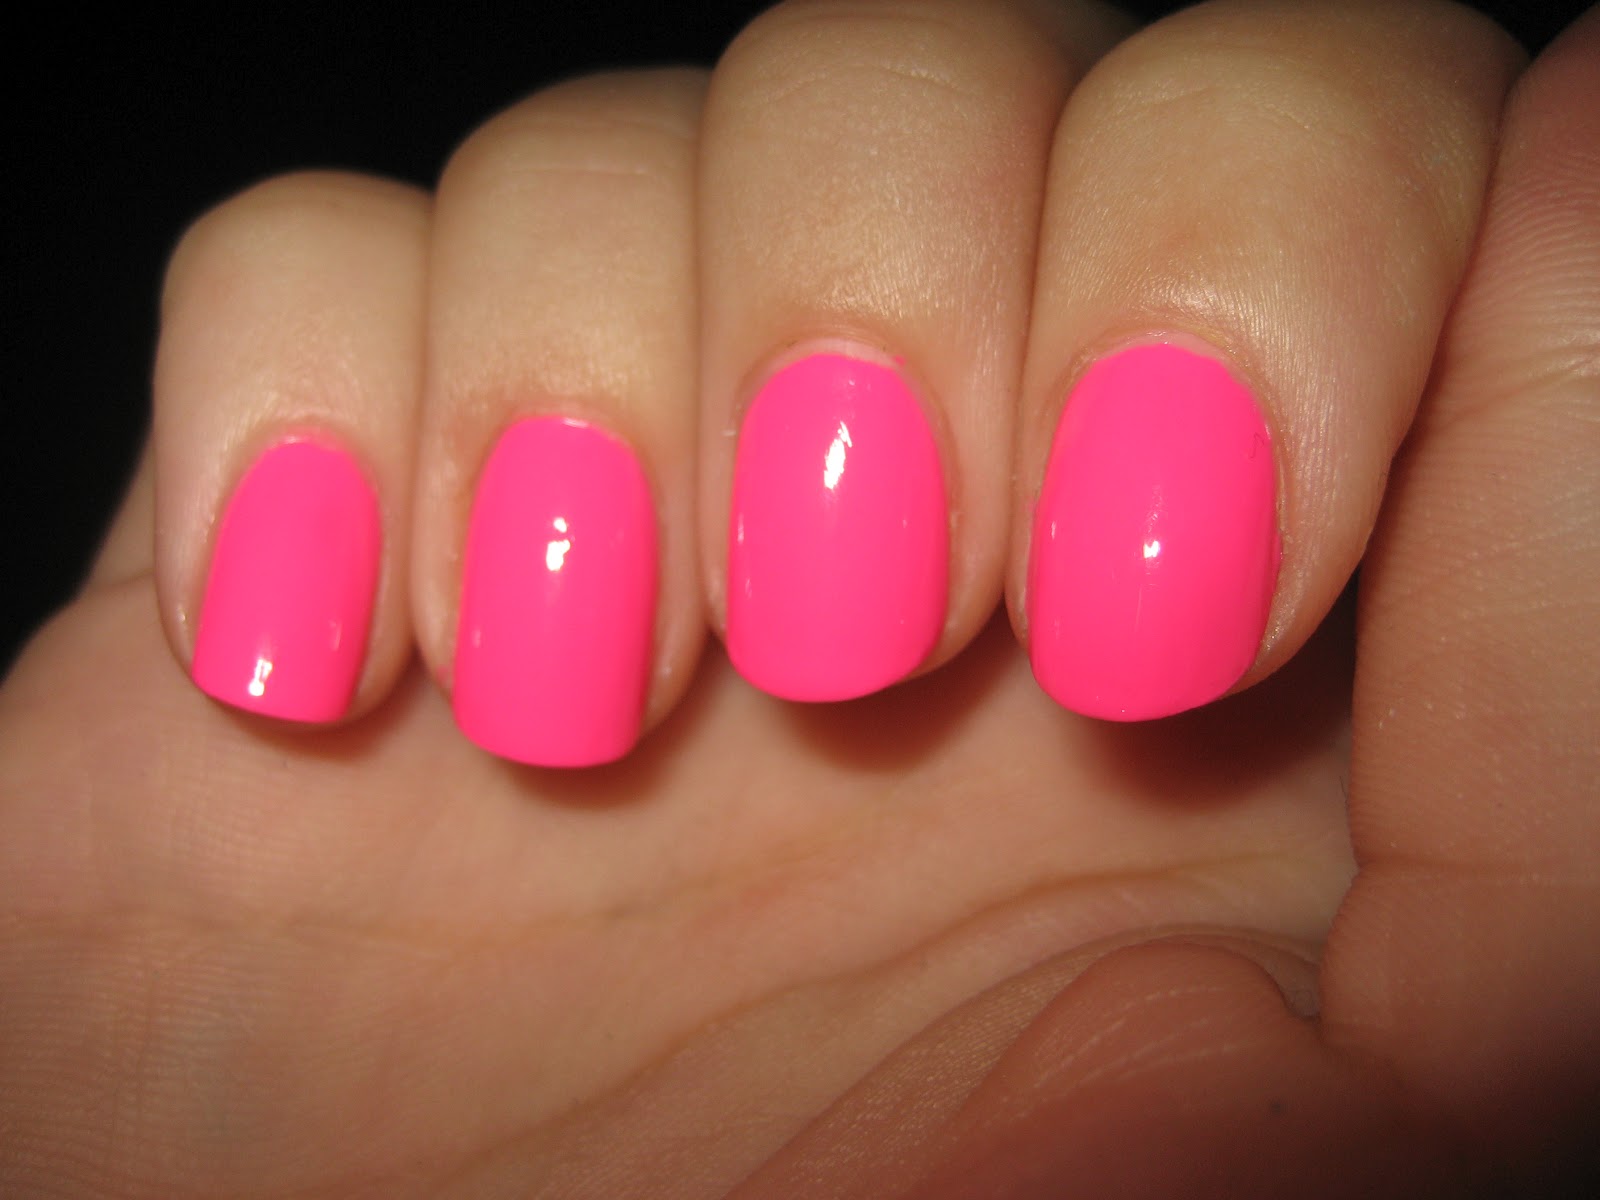 6. Orly Nail Lacquer in "Beach Cruiser" - wide 4